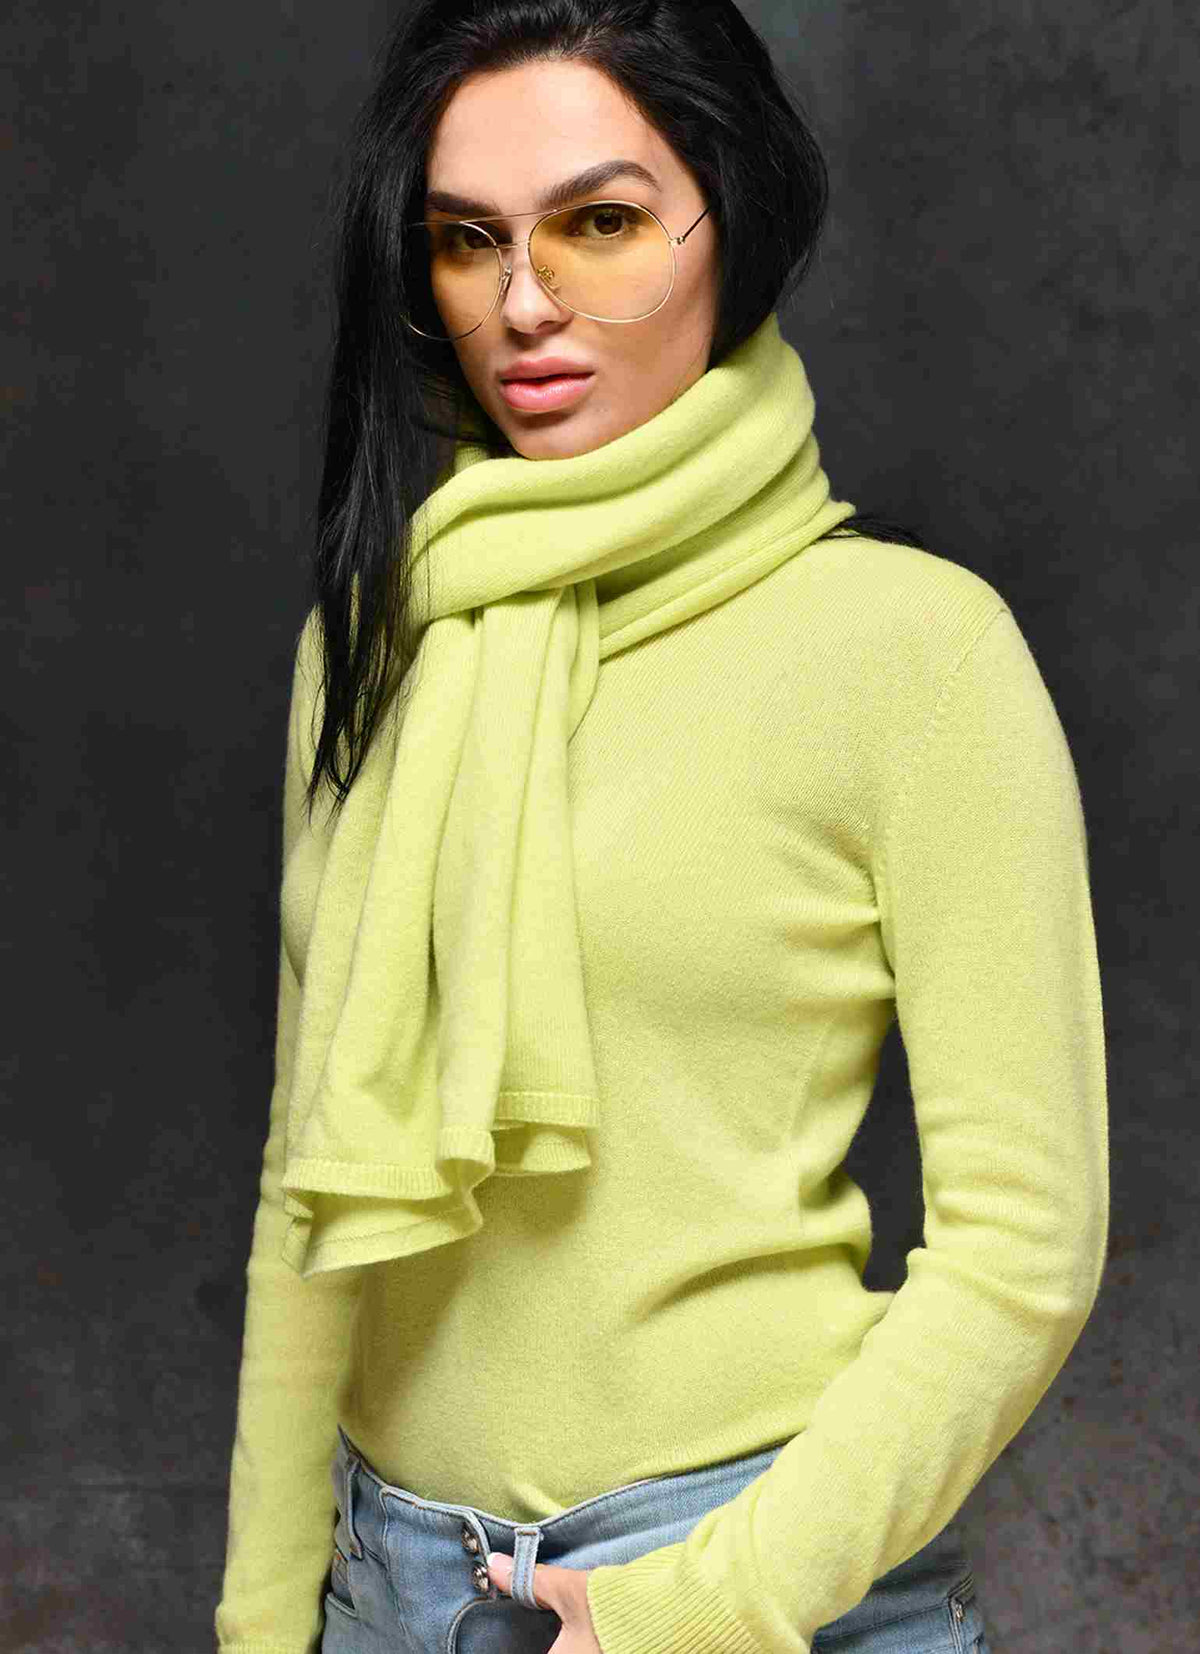 Sunglasses for women in color gold worn with yellow cashmere sweater and matching scarf